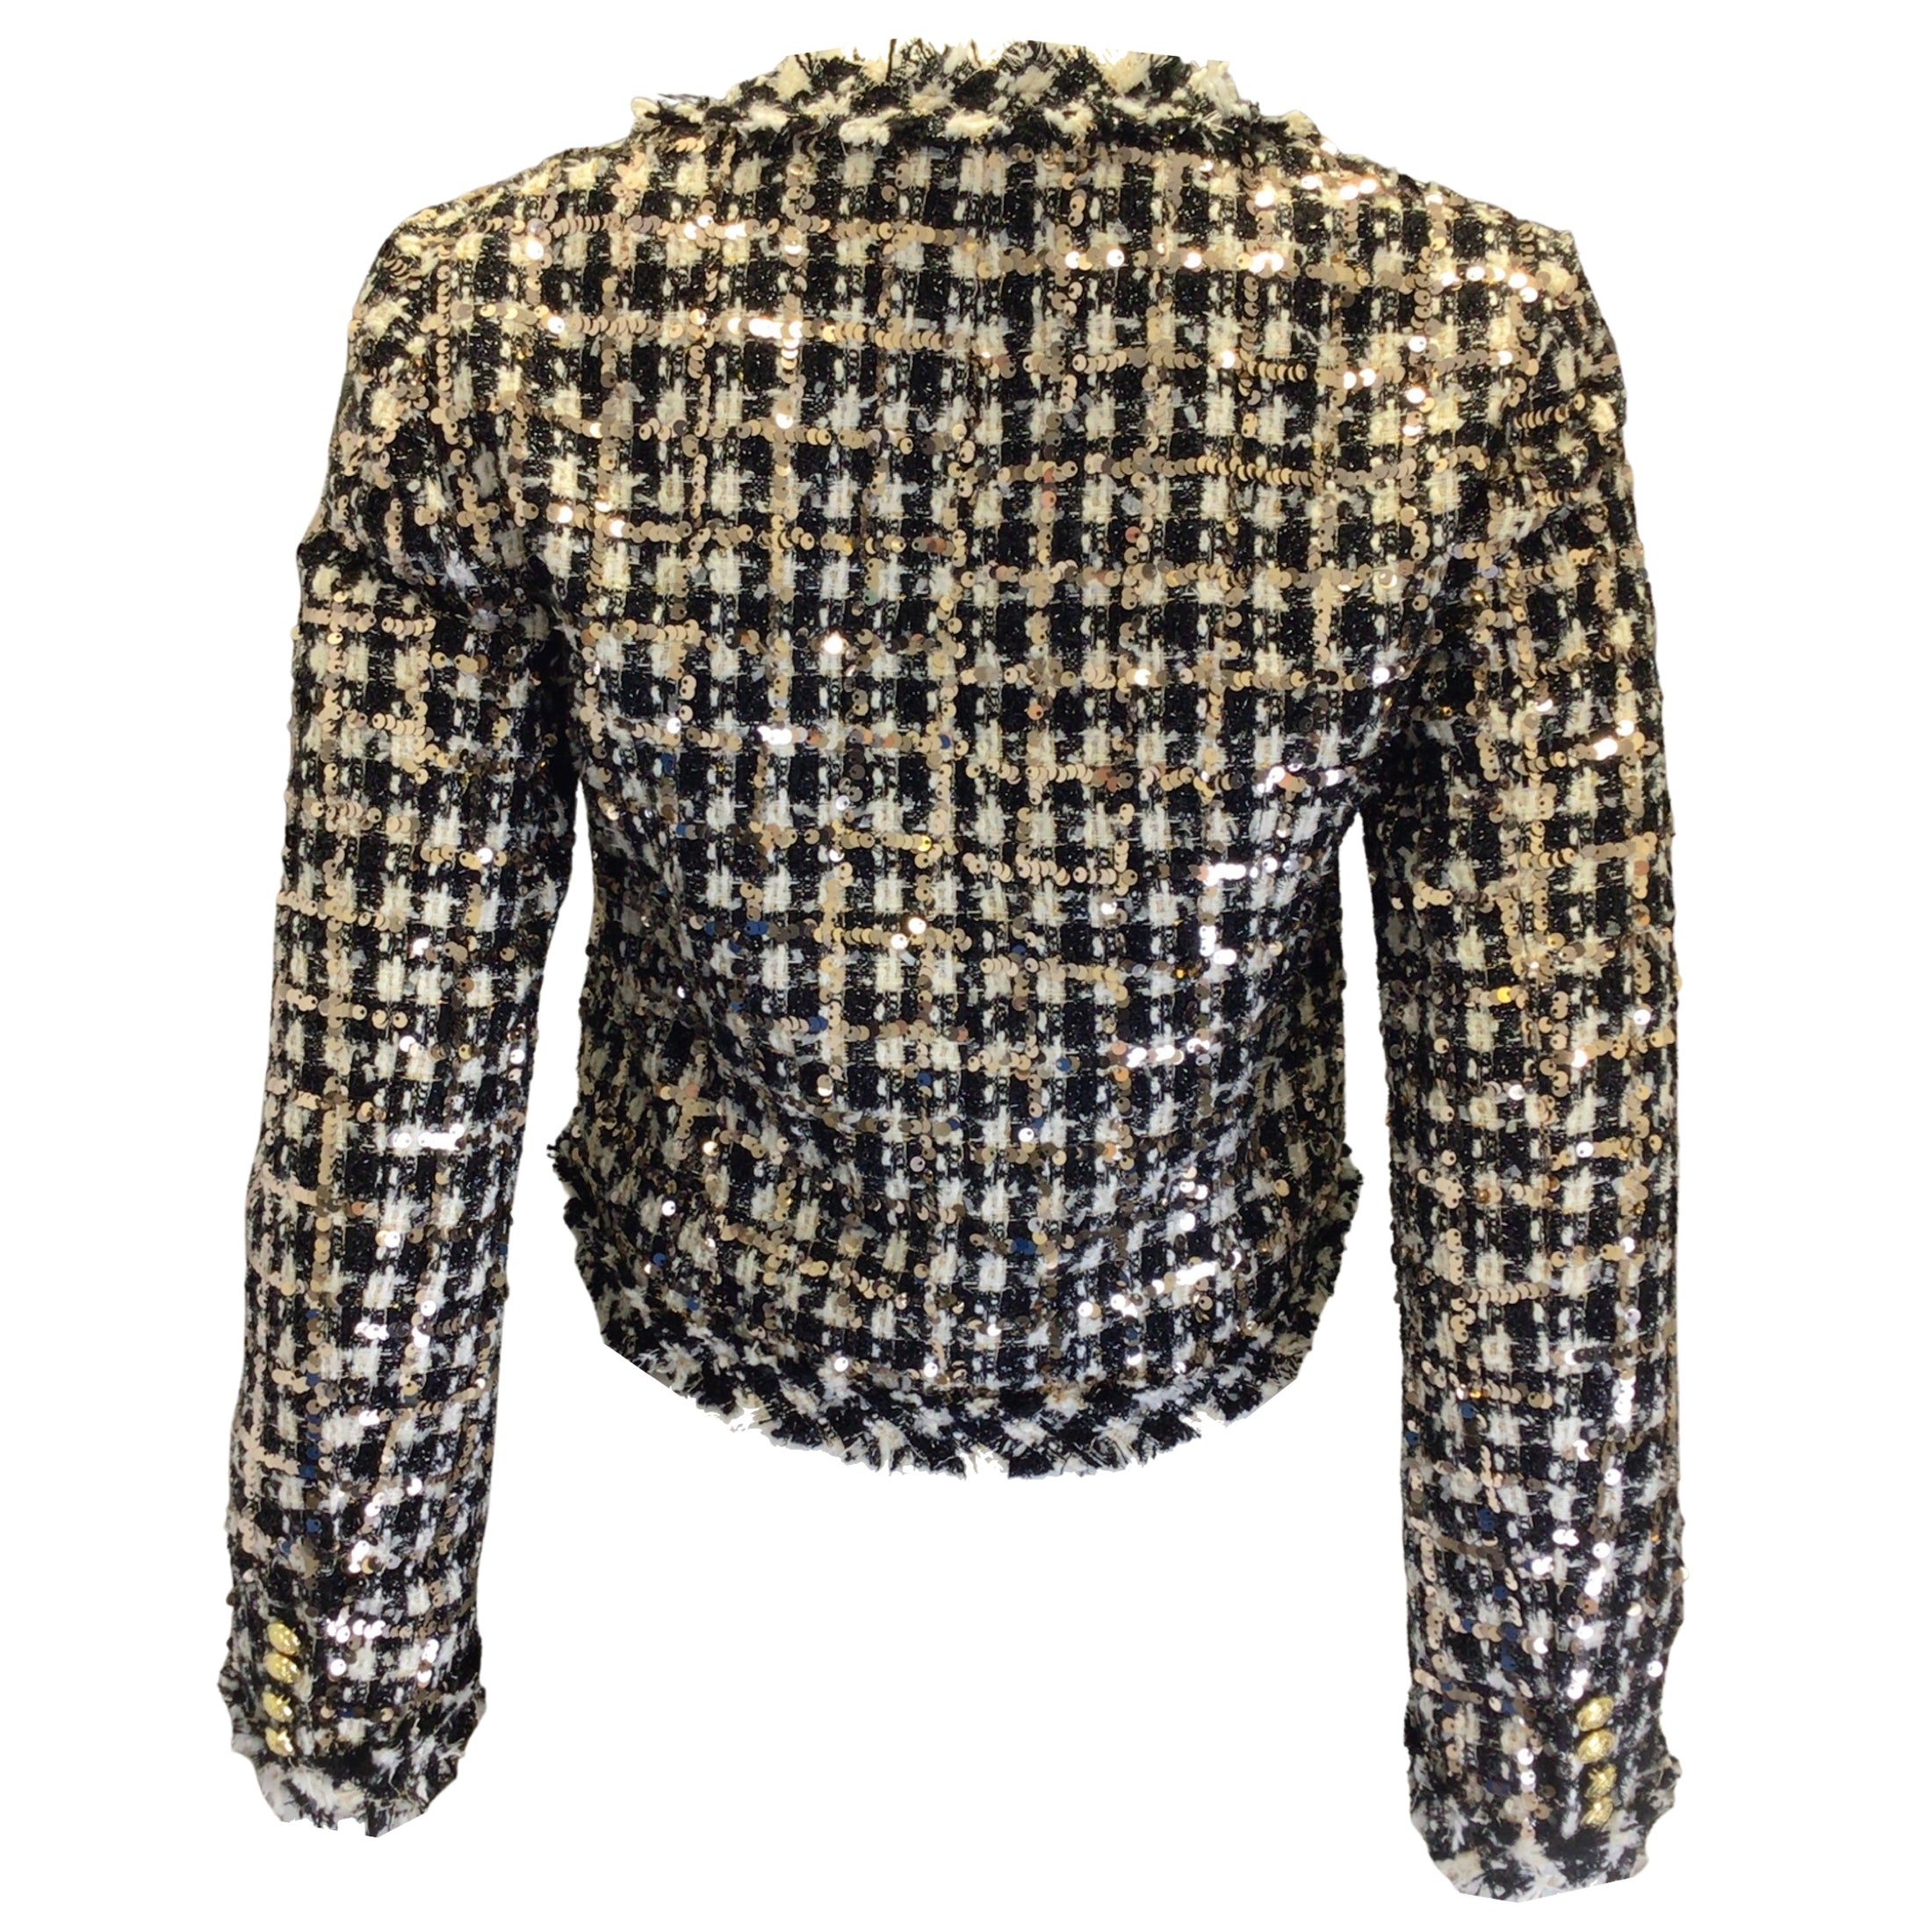 Derek Lam 10 Crosby Jacqueline Black / White / Silver Sequined and Gold Buttoned Cropped Boucle Tweed Blazer